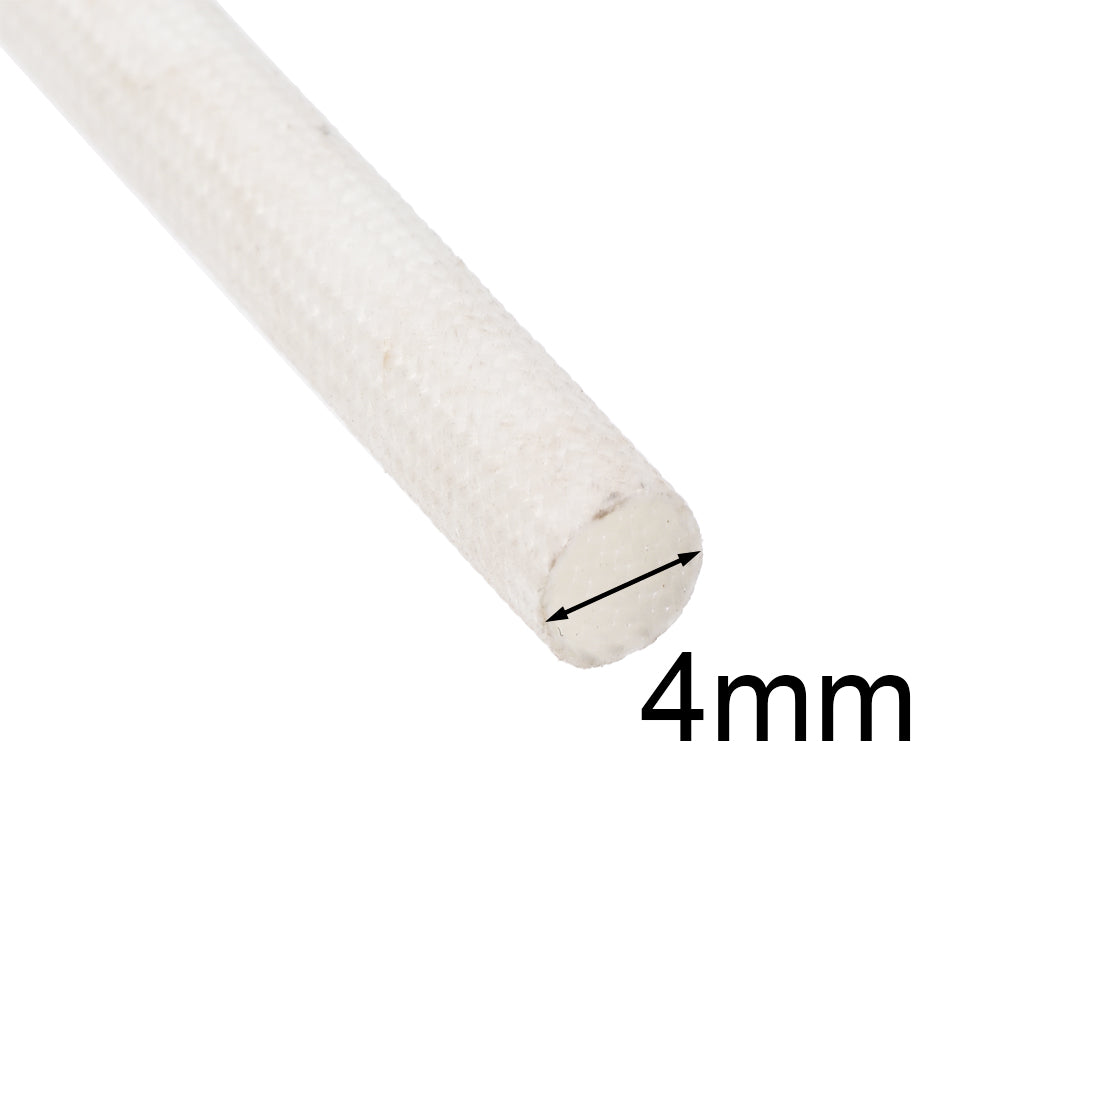 uxcell Uxcell Insulation Cable Protector,16.4Ft-4mm High TEMP Silicone Fiberglass Sleeve White